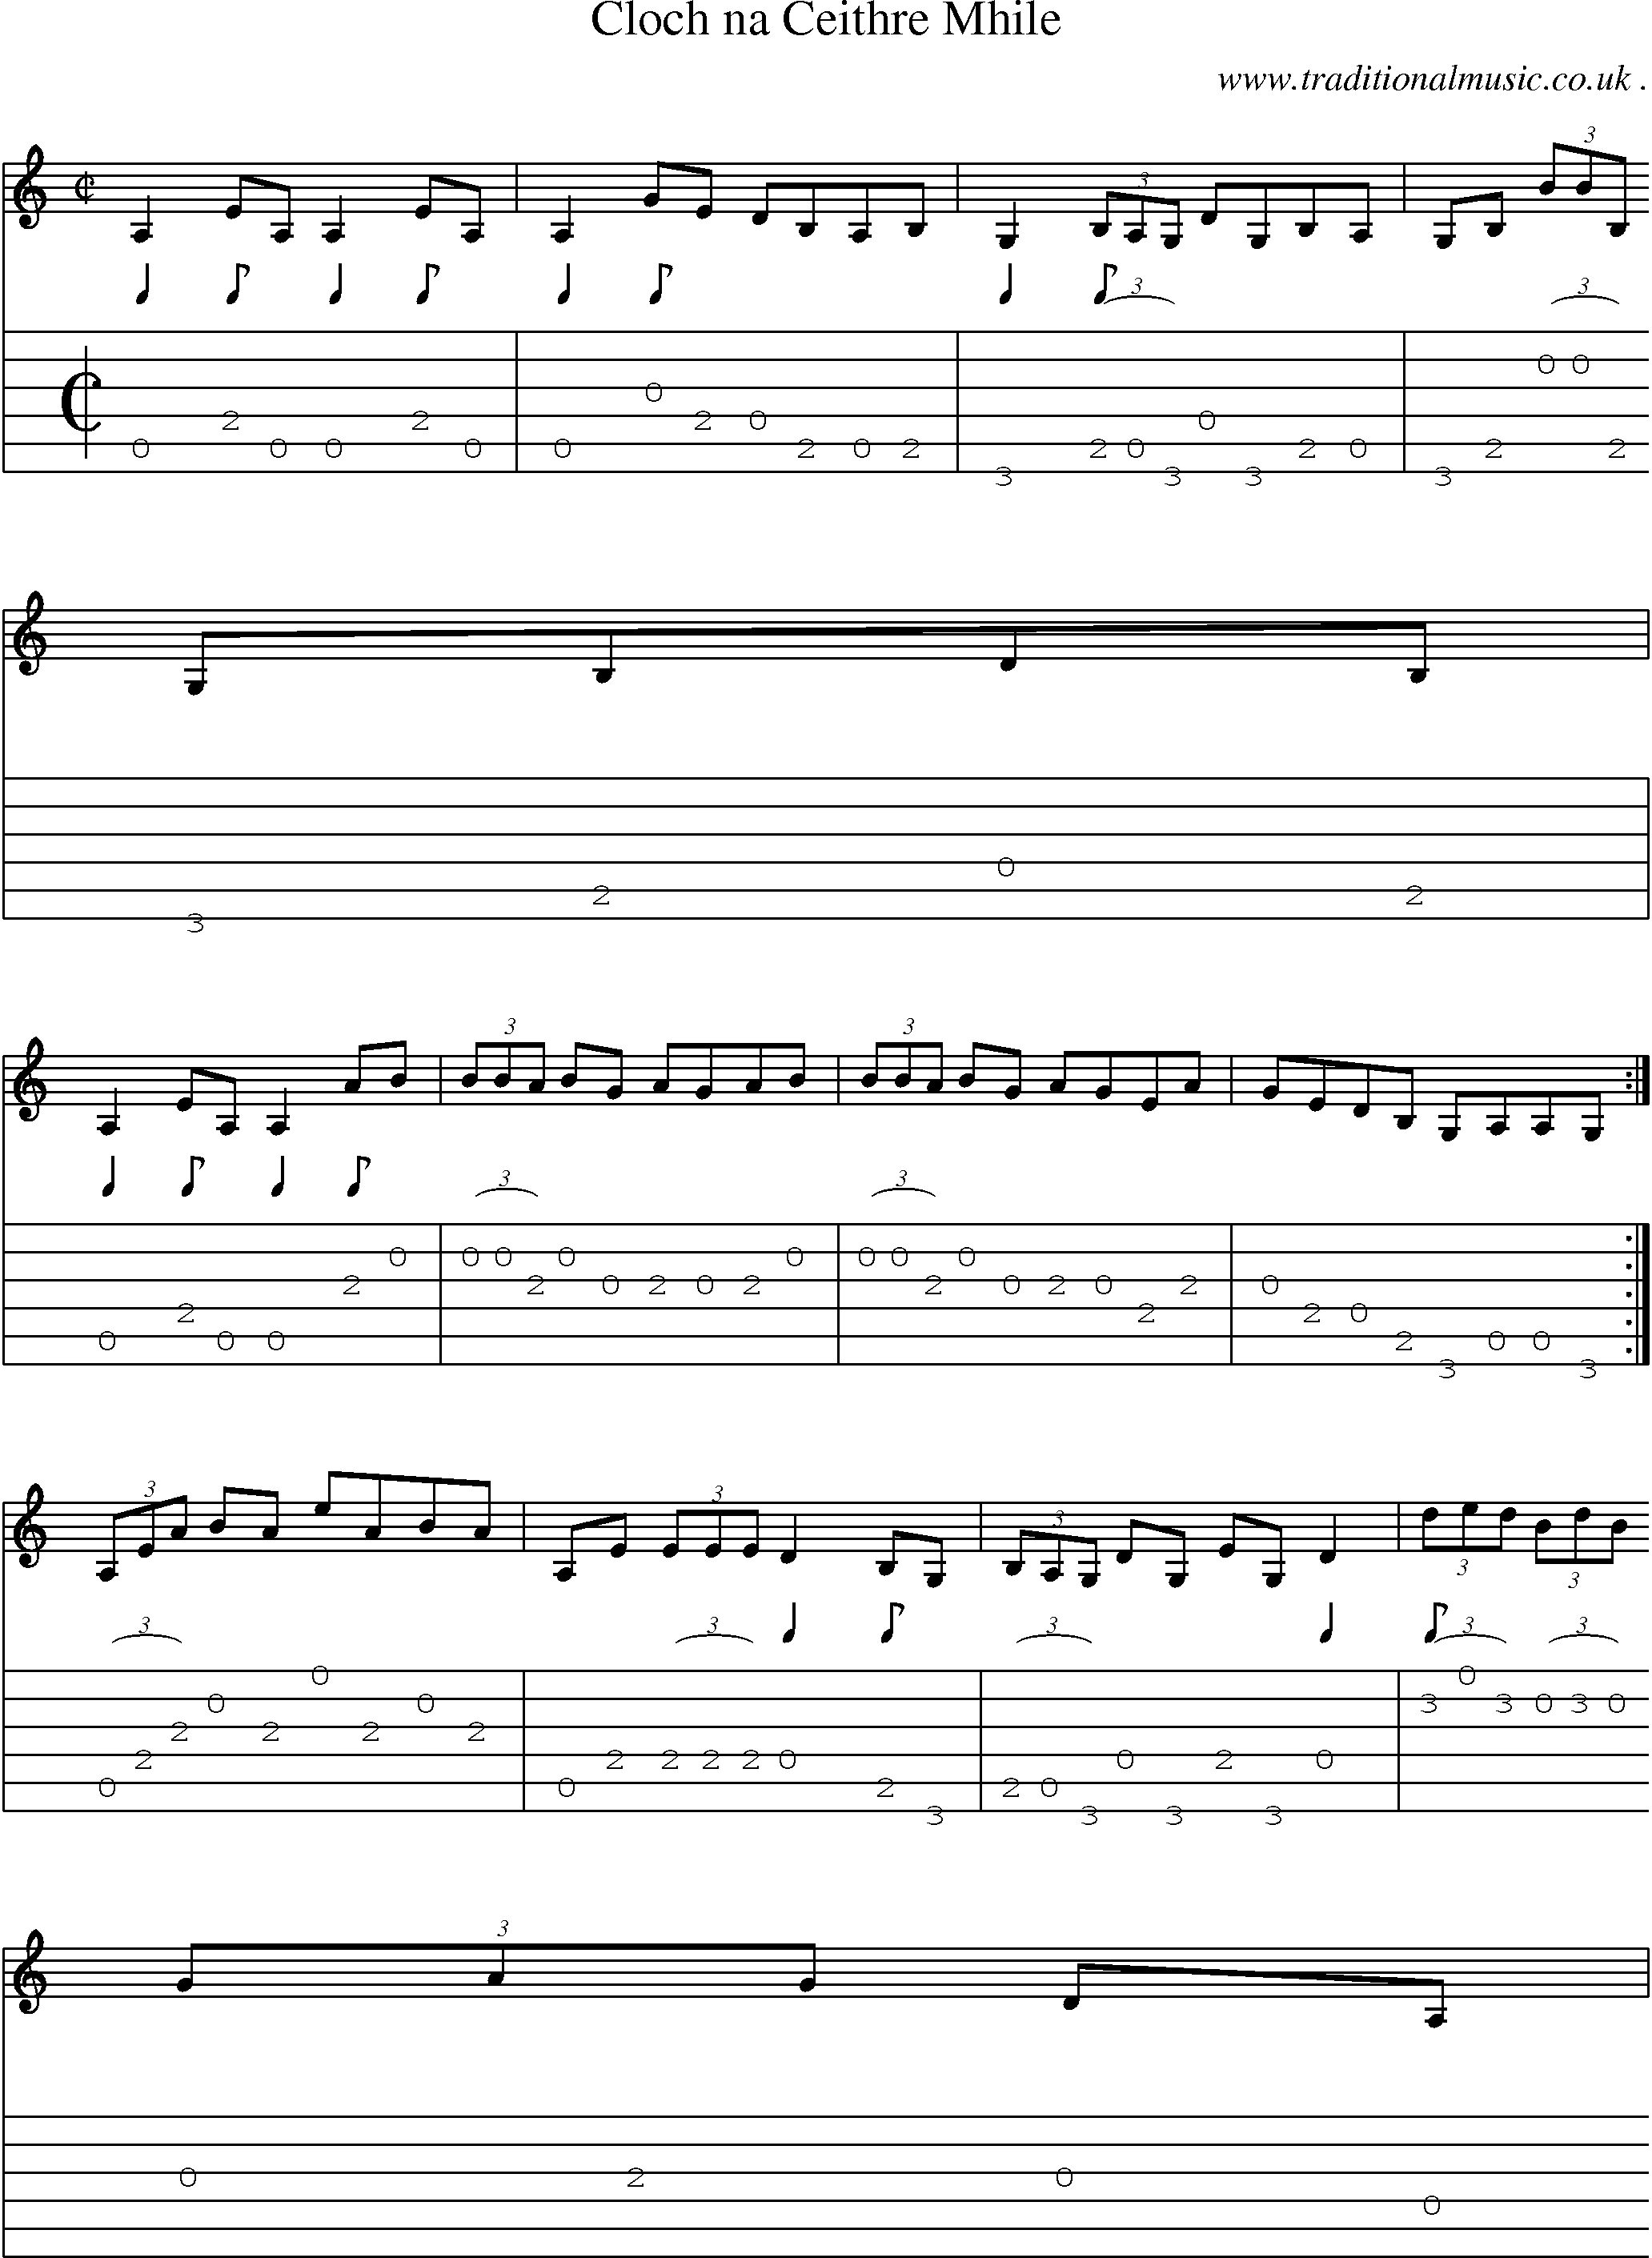 Sheet-Music and Guitar Tabs for Cloch Na Ceithre Mhile